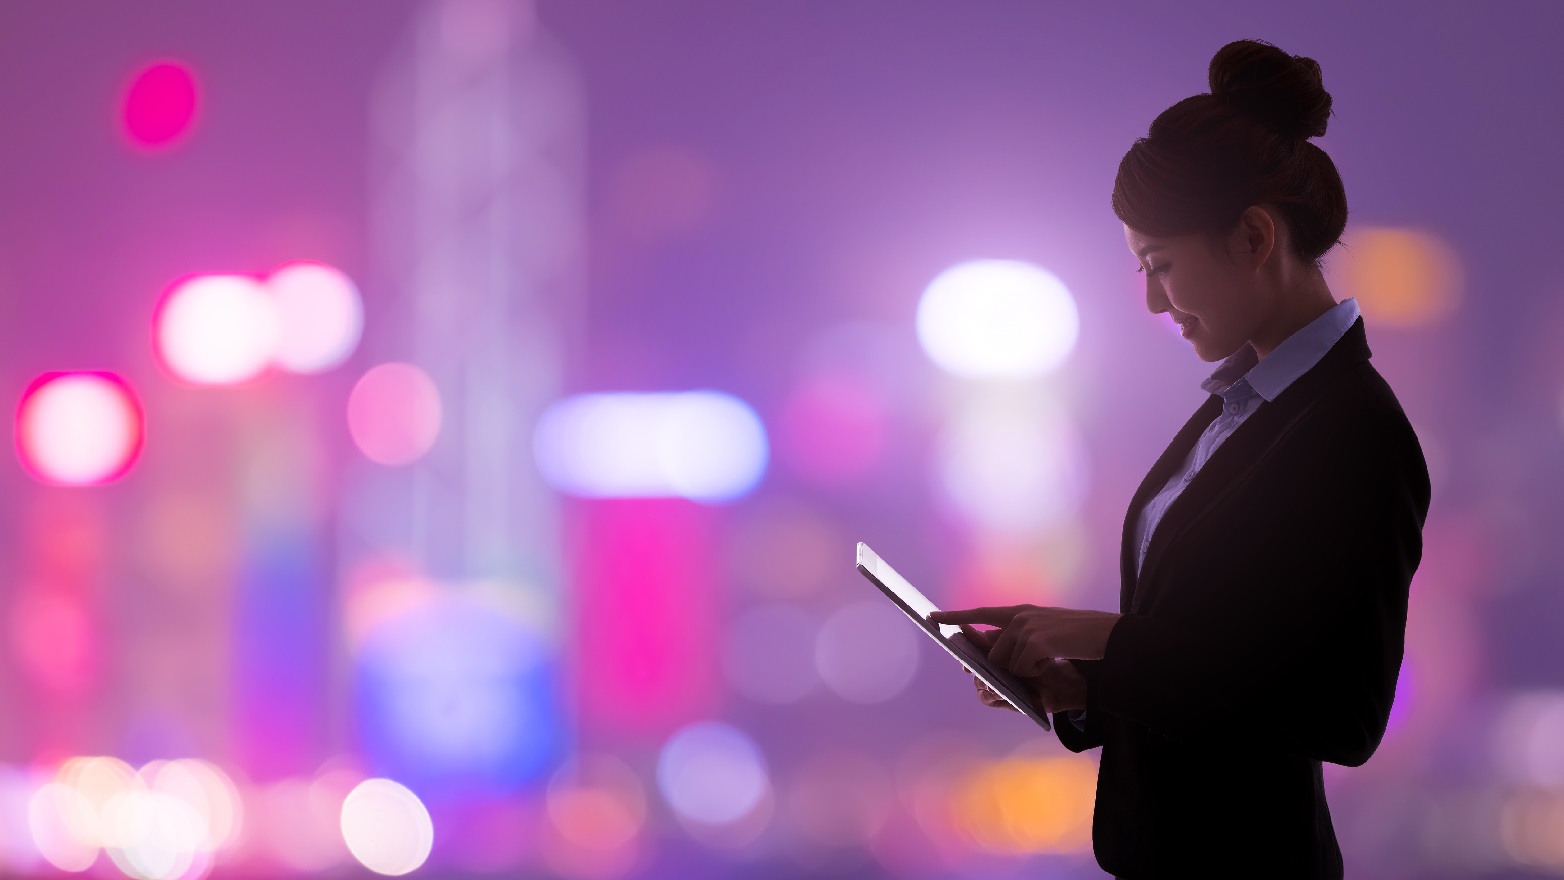 Woman using a tablet in front of a lit city scape at night